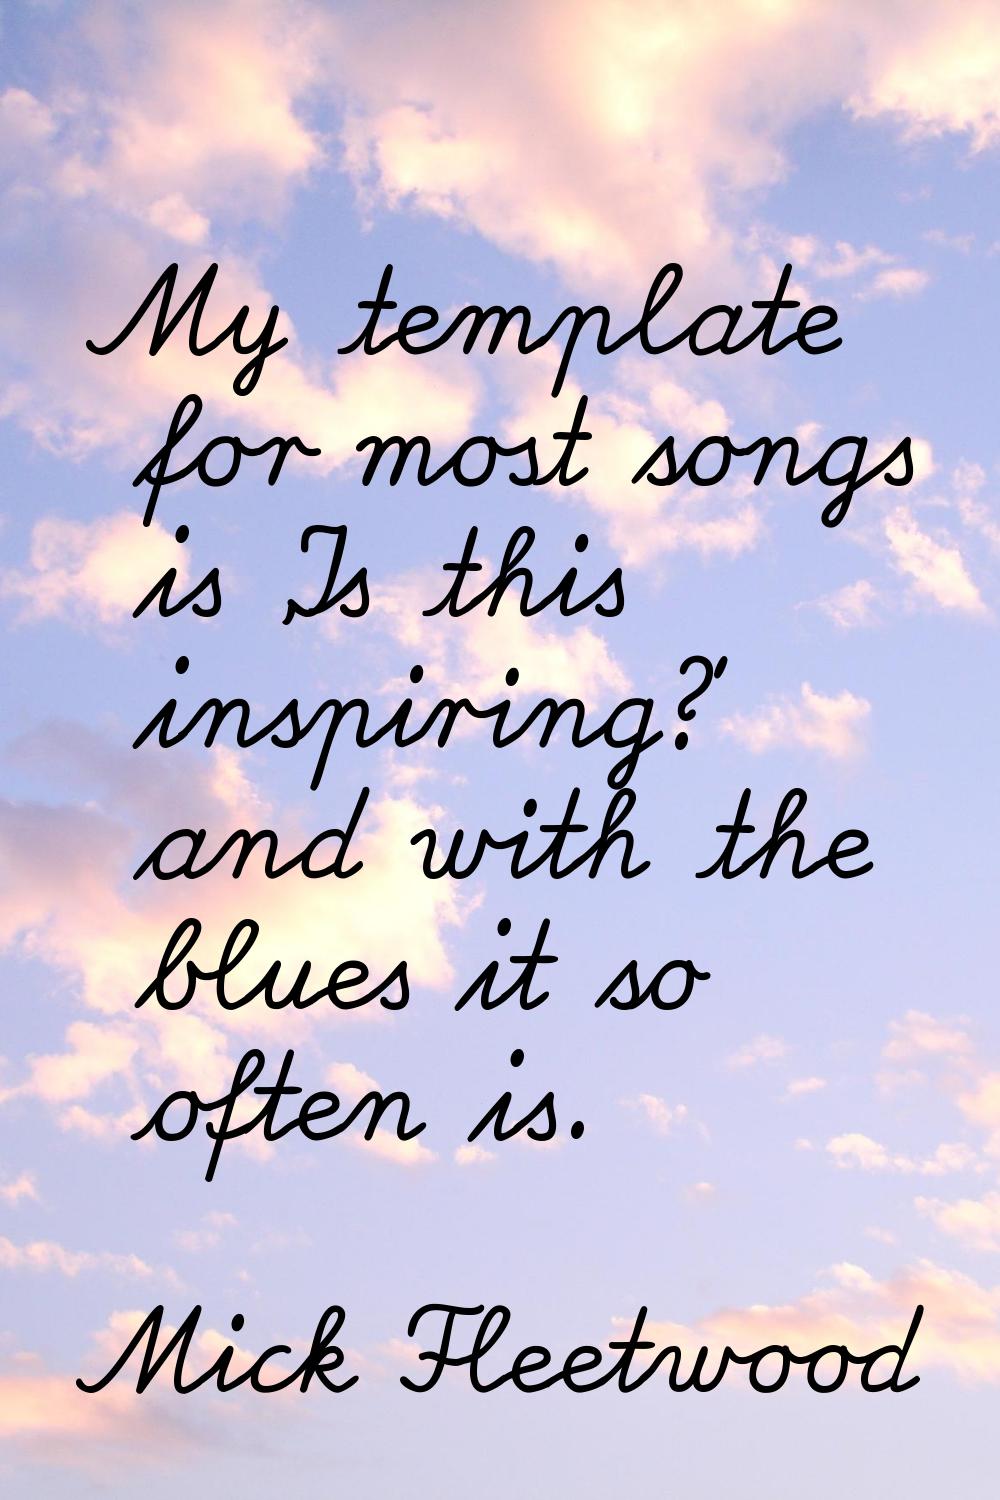 My template for most songs is 'Is this inspiring?' and with the blues it so often is.